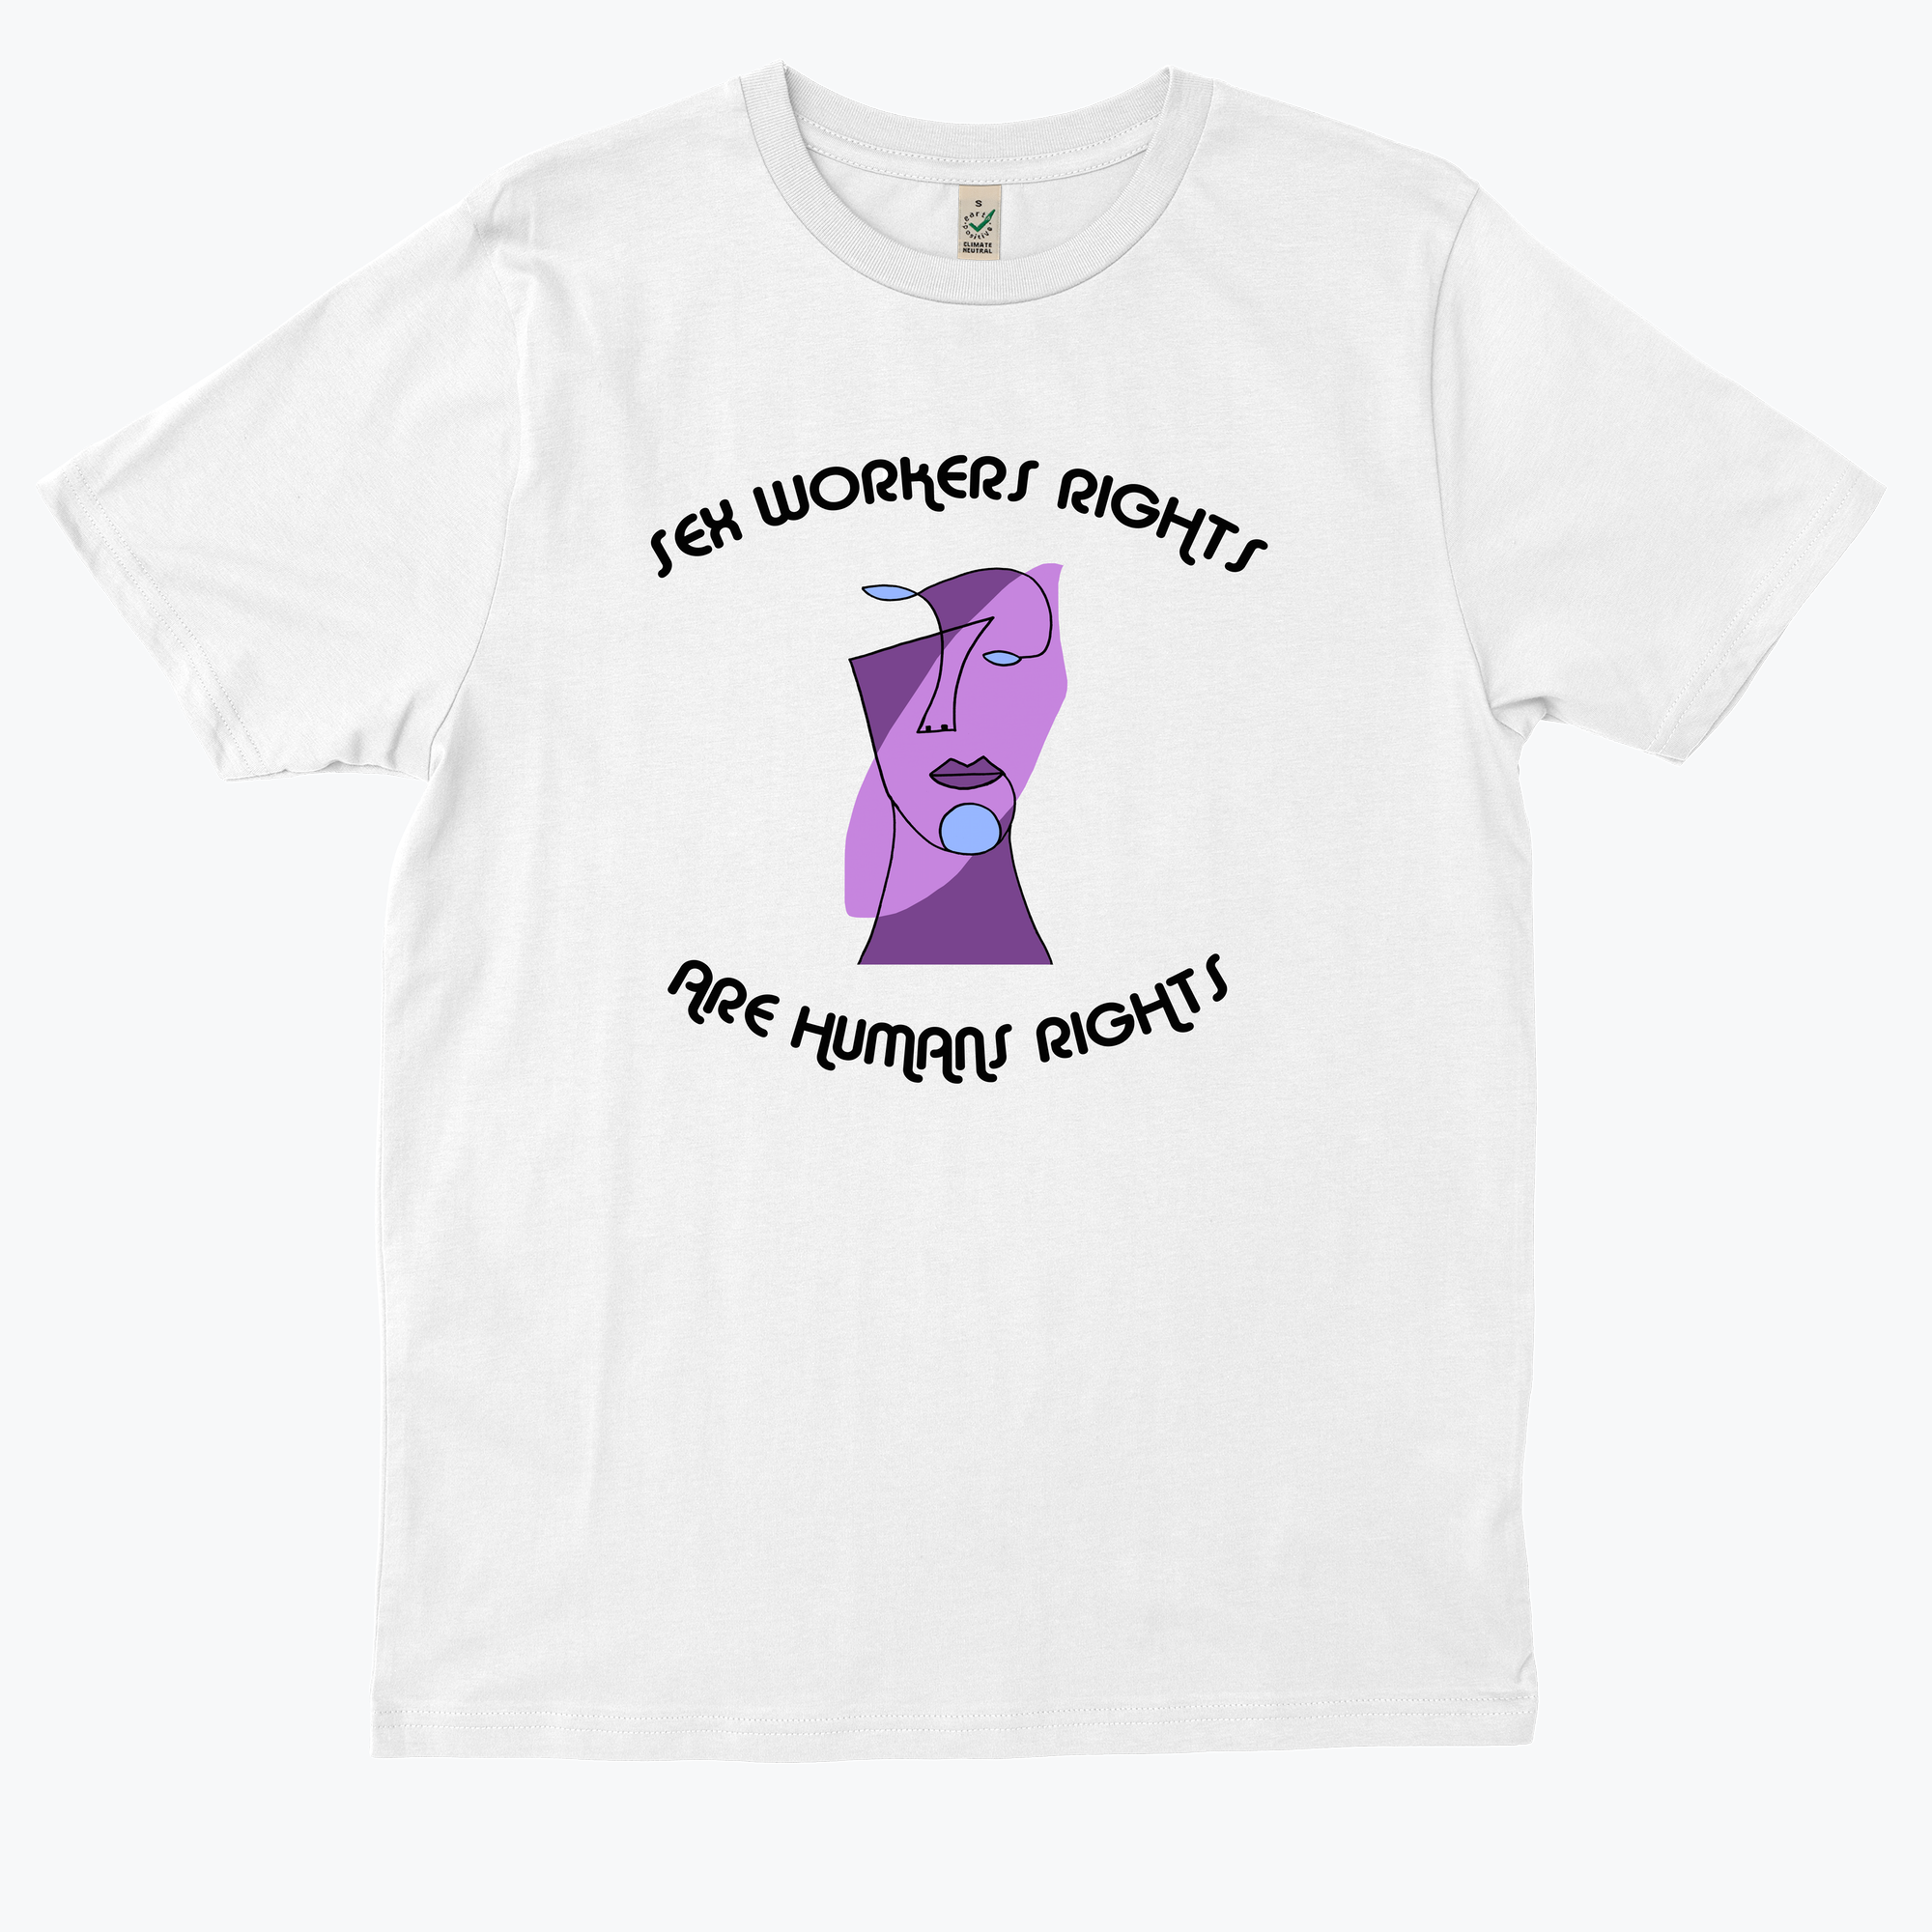 Support Your Local Sex Worker T Shirt